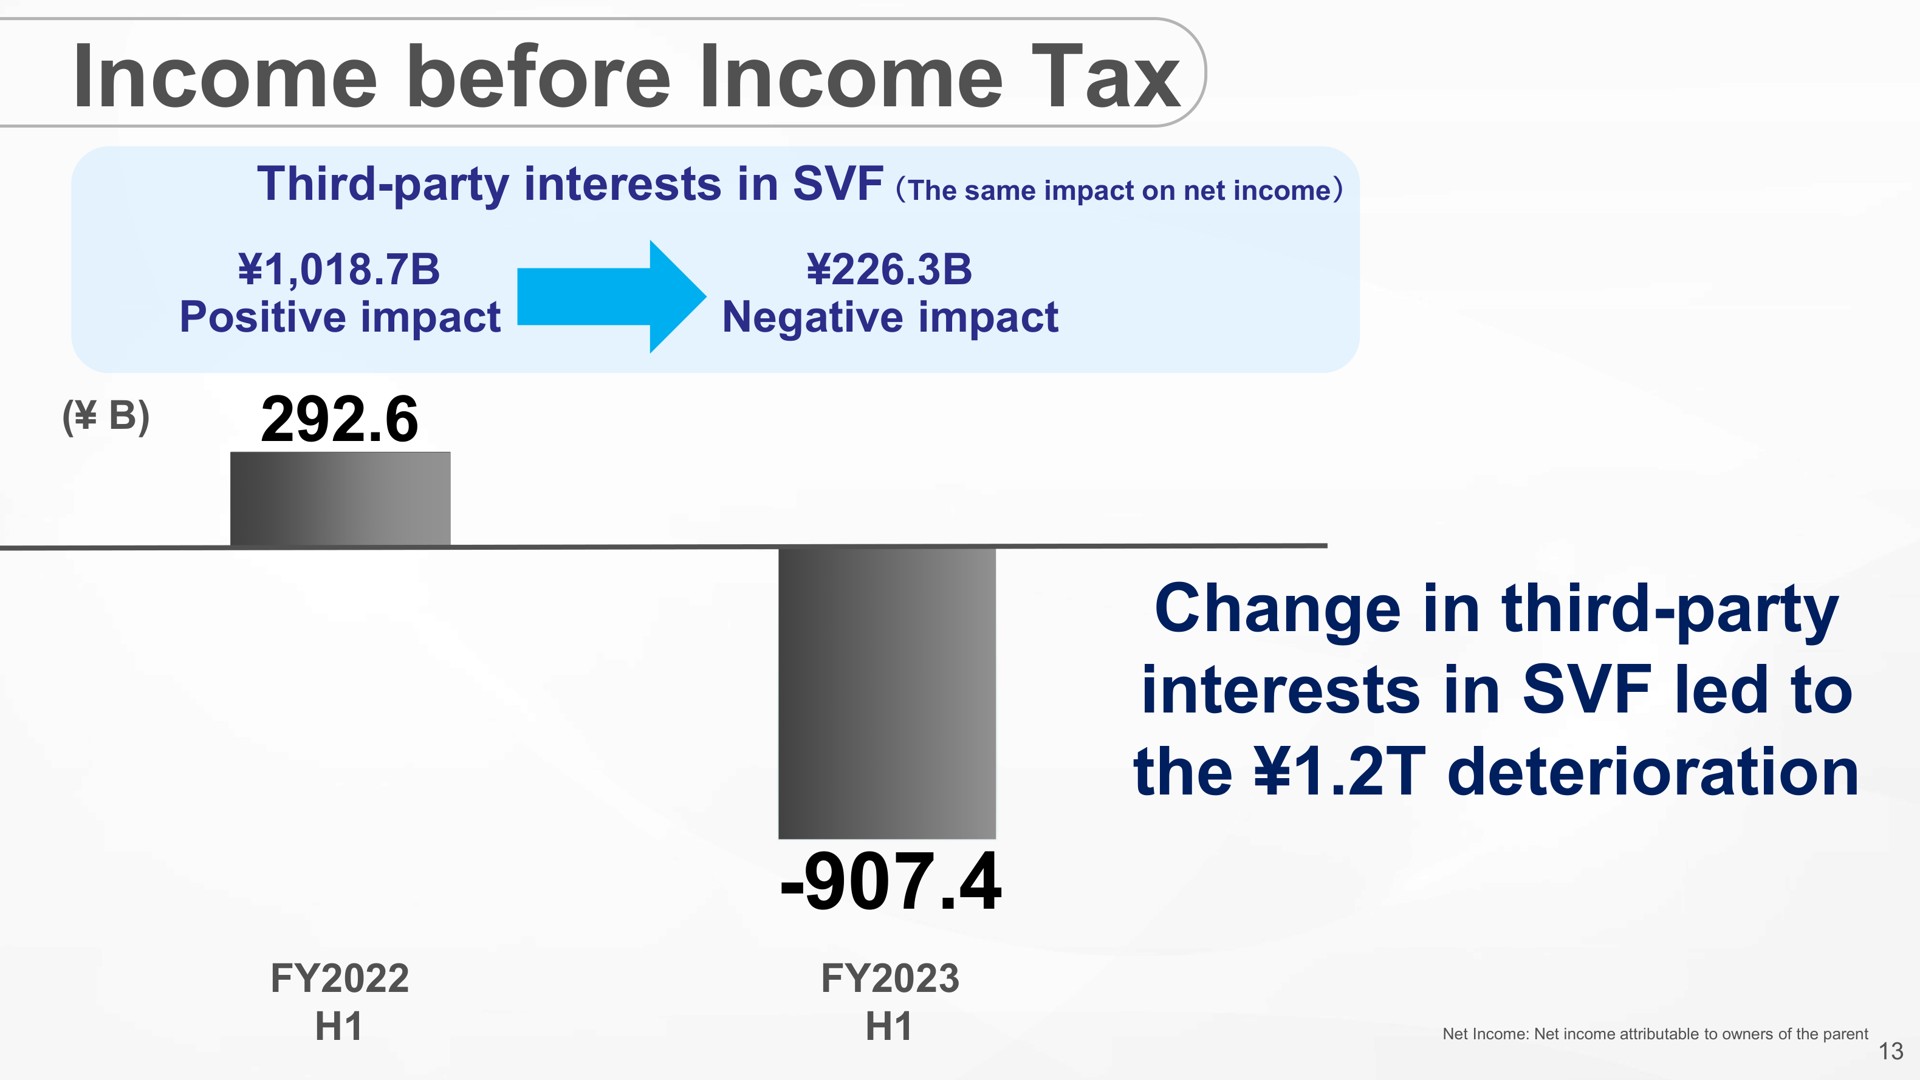 income before income tax change in third party interests in led to the deterioration | SoftBank